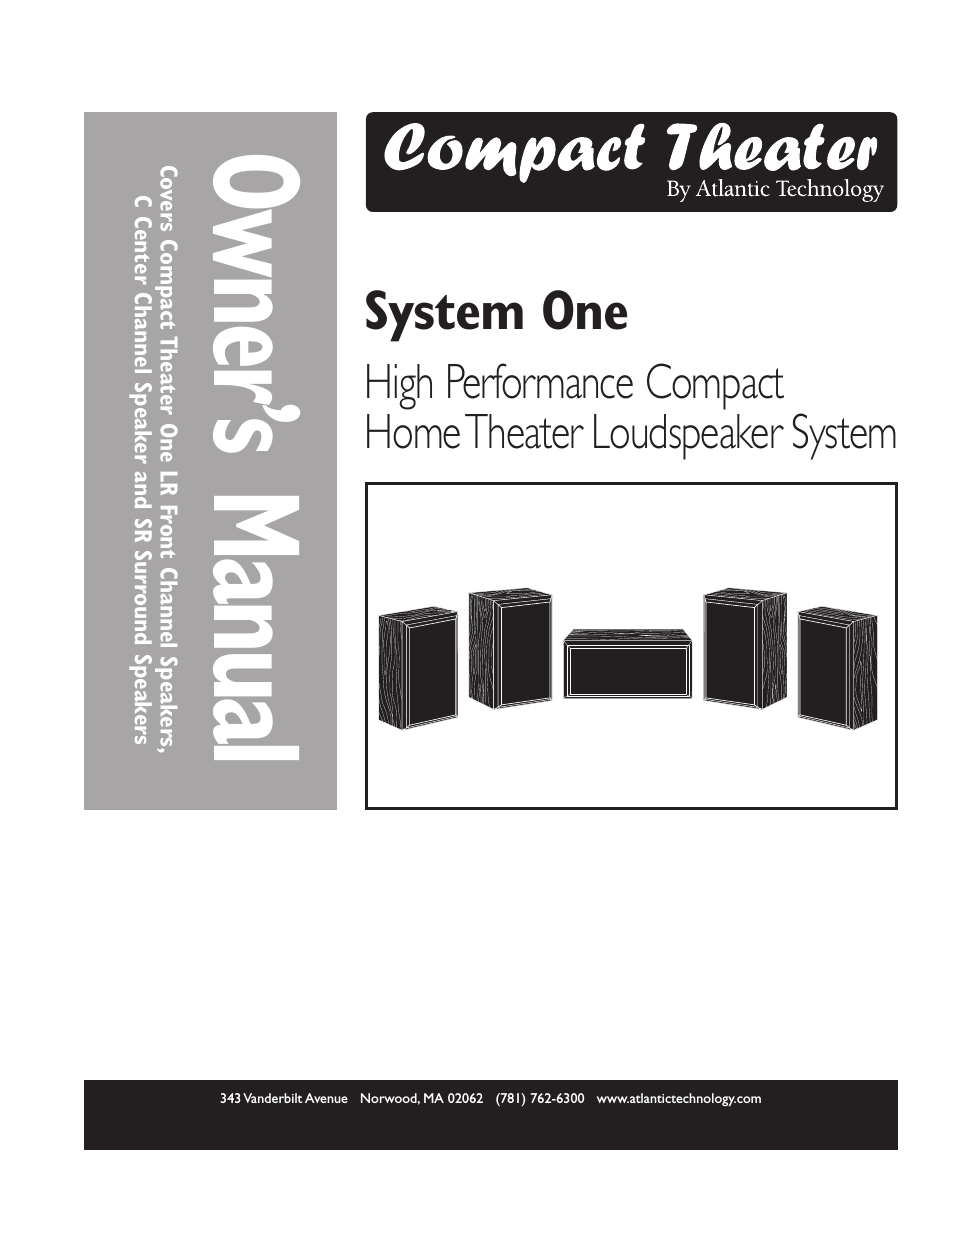 Compact Theater High Performance Compact